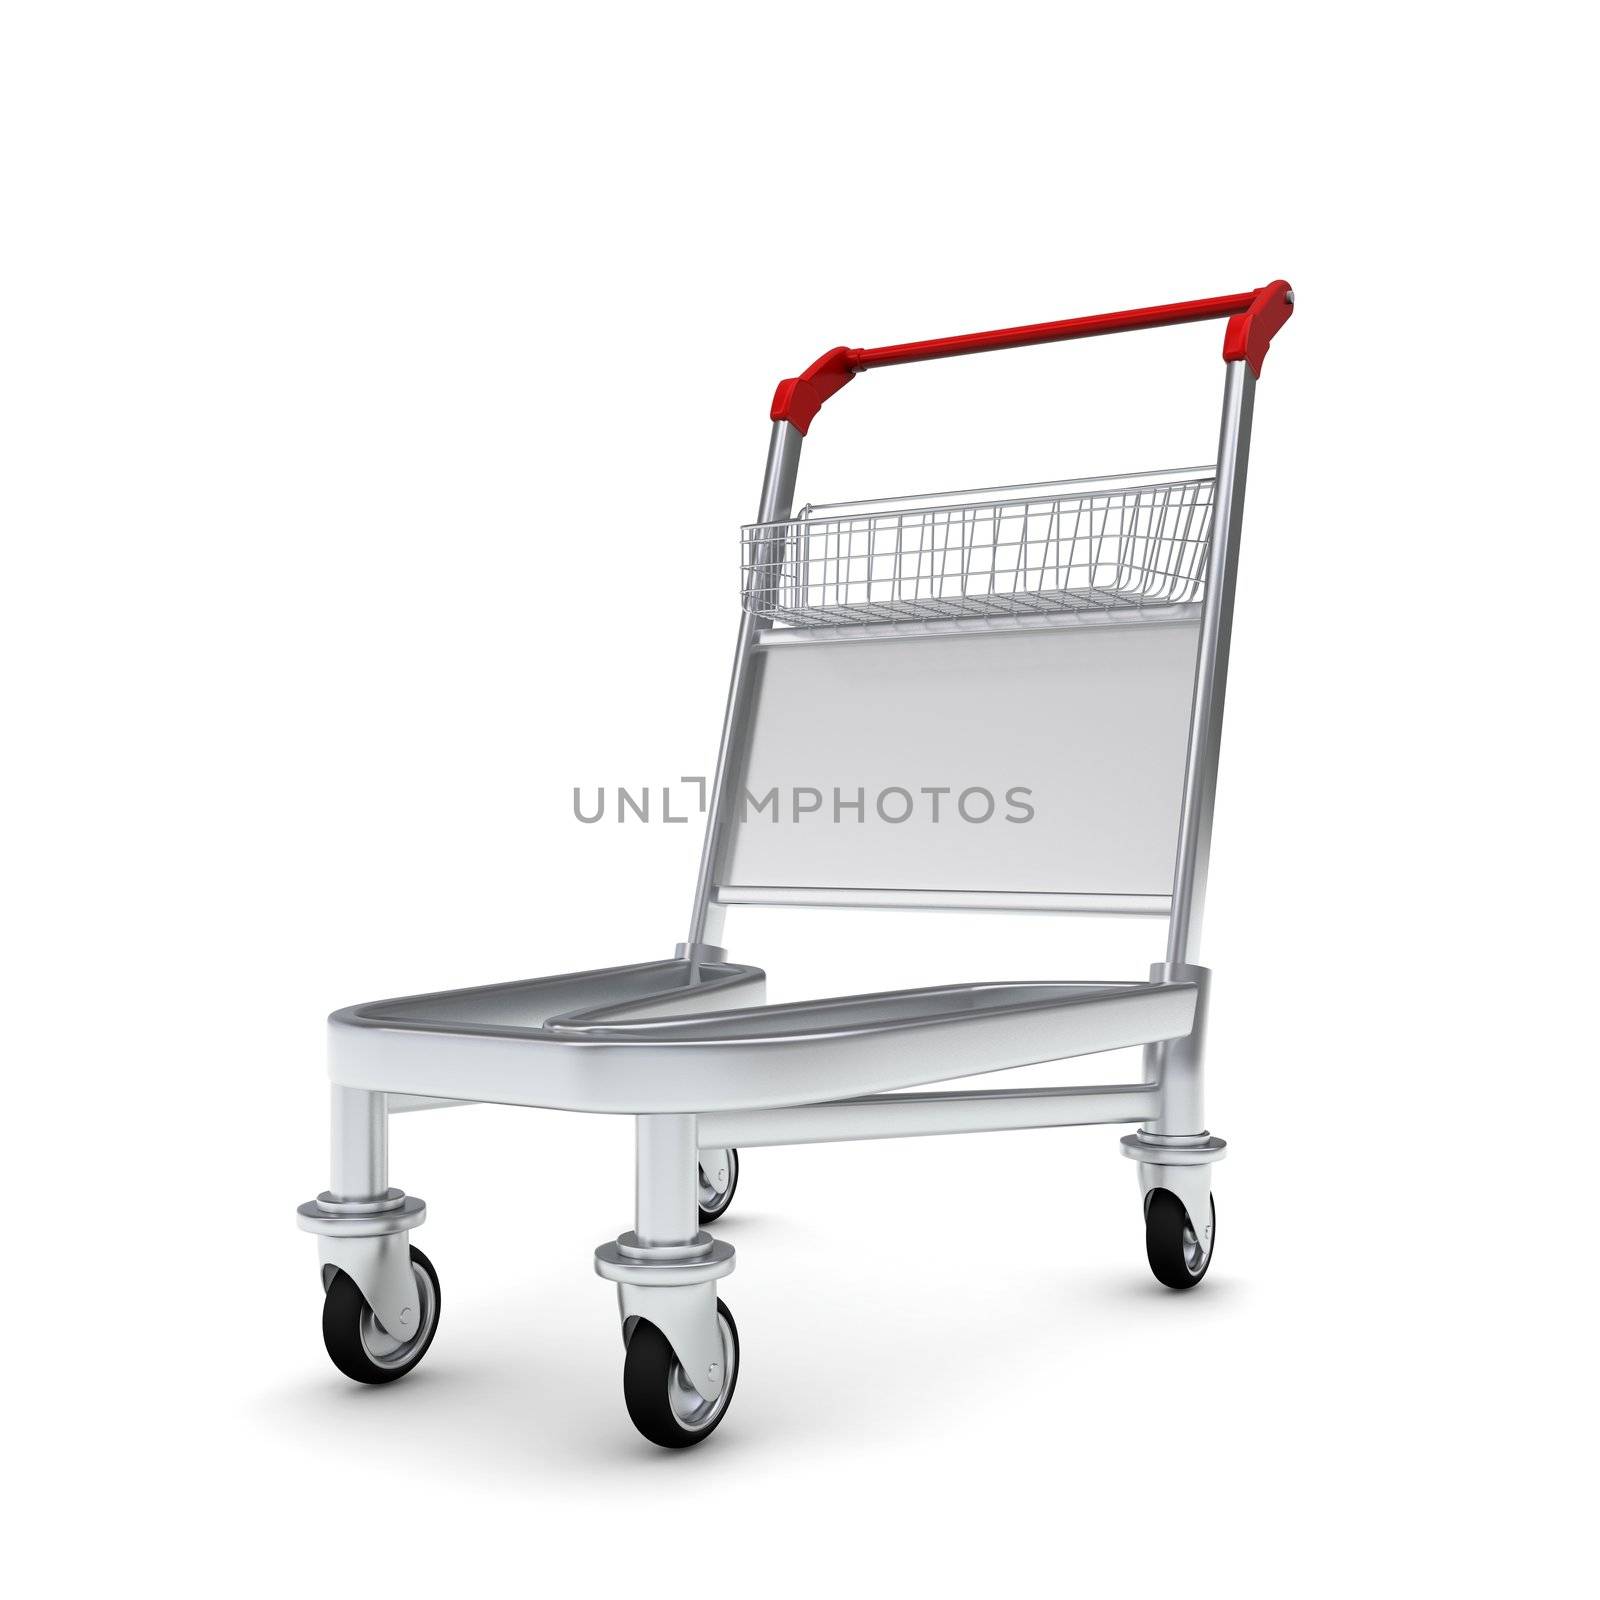 Trolley for luggage at the airport by cherezoff